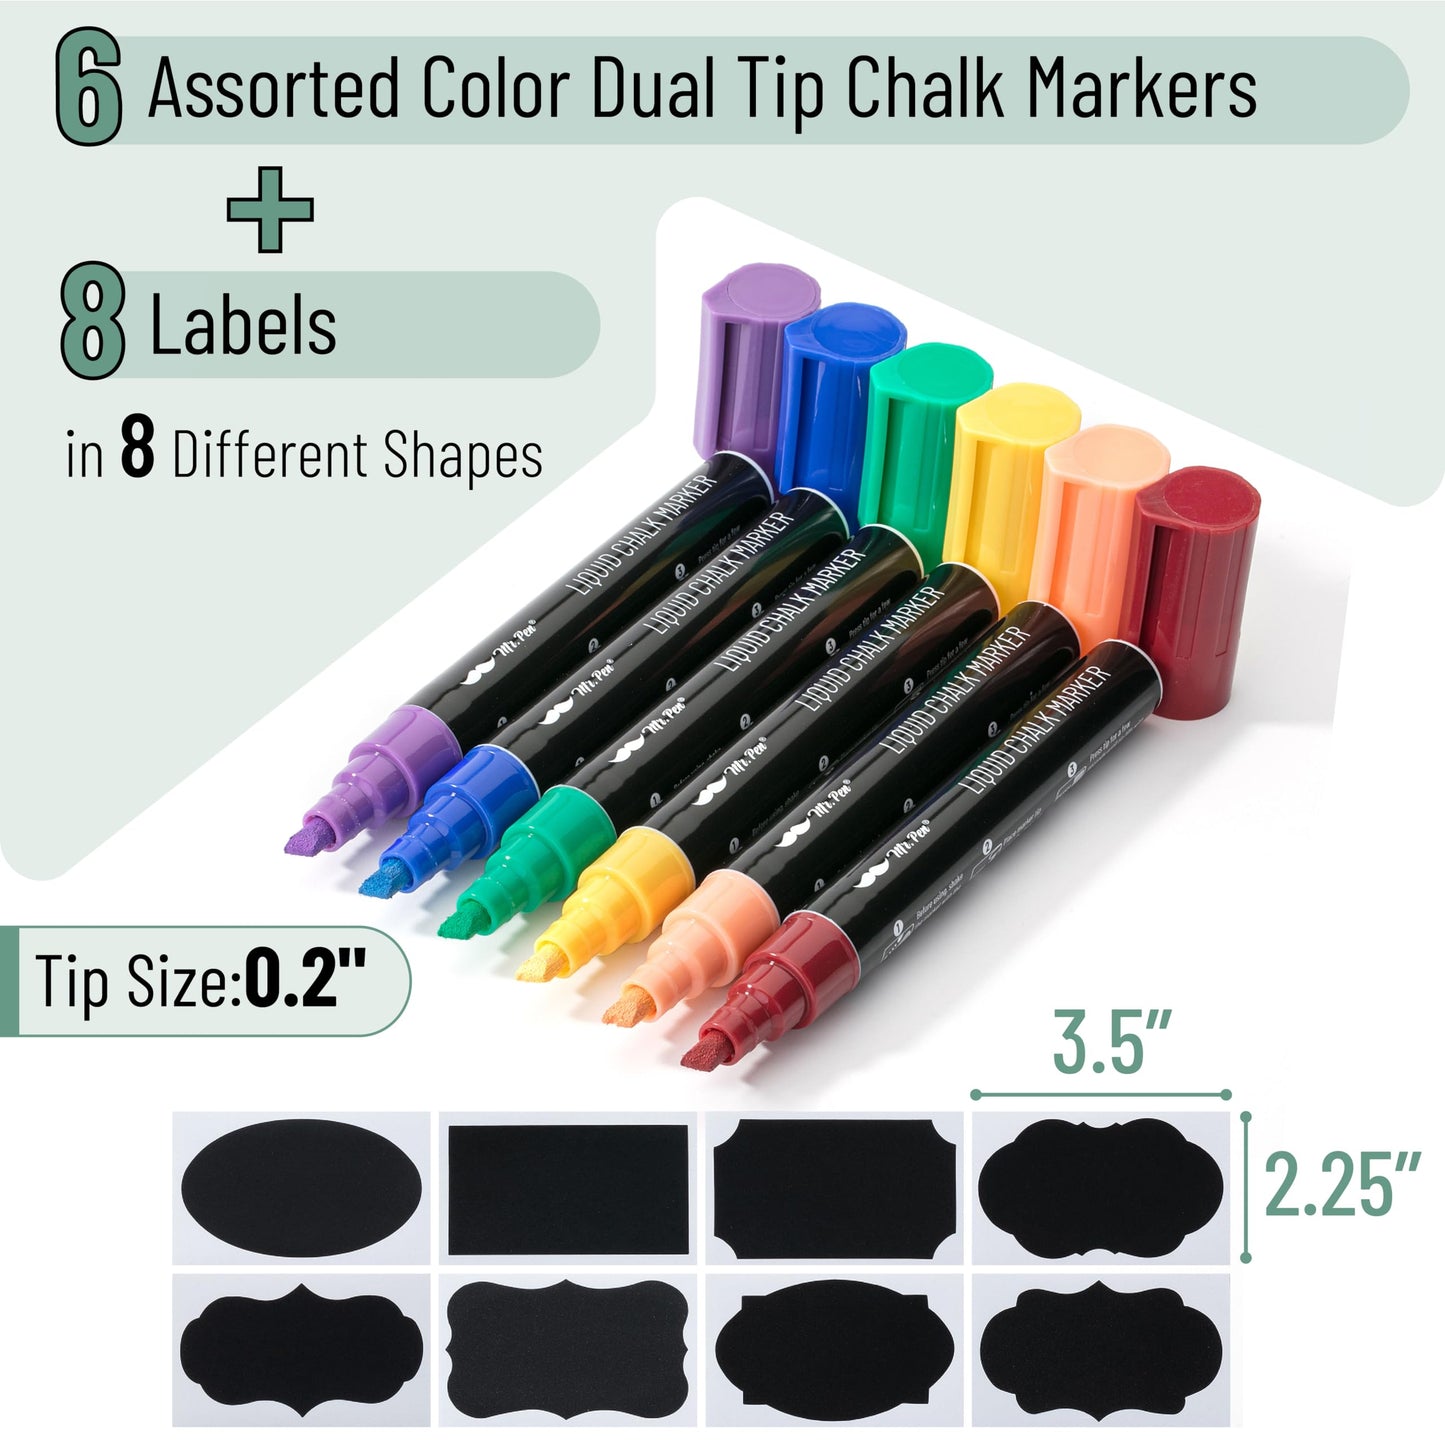 Mr. Pen- Chalk Markers, 6 Pack, Assorted Colors, 8 Labels, Chalkboard Markers, Liquid Chalk Markers for Chalkboard, Chalk Pens, Chalk Marker, Glass